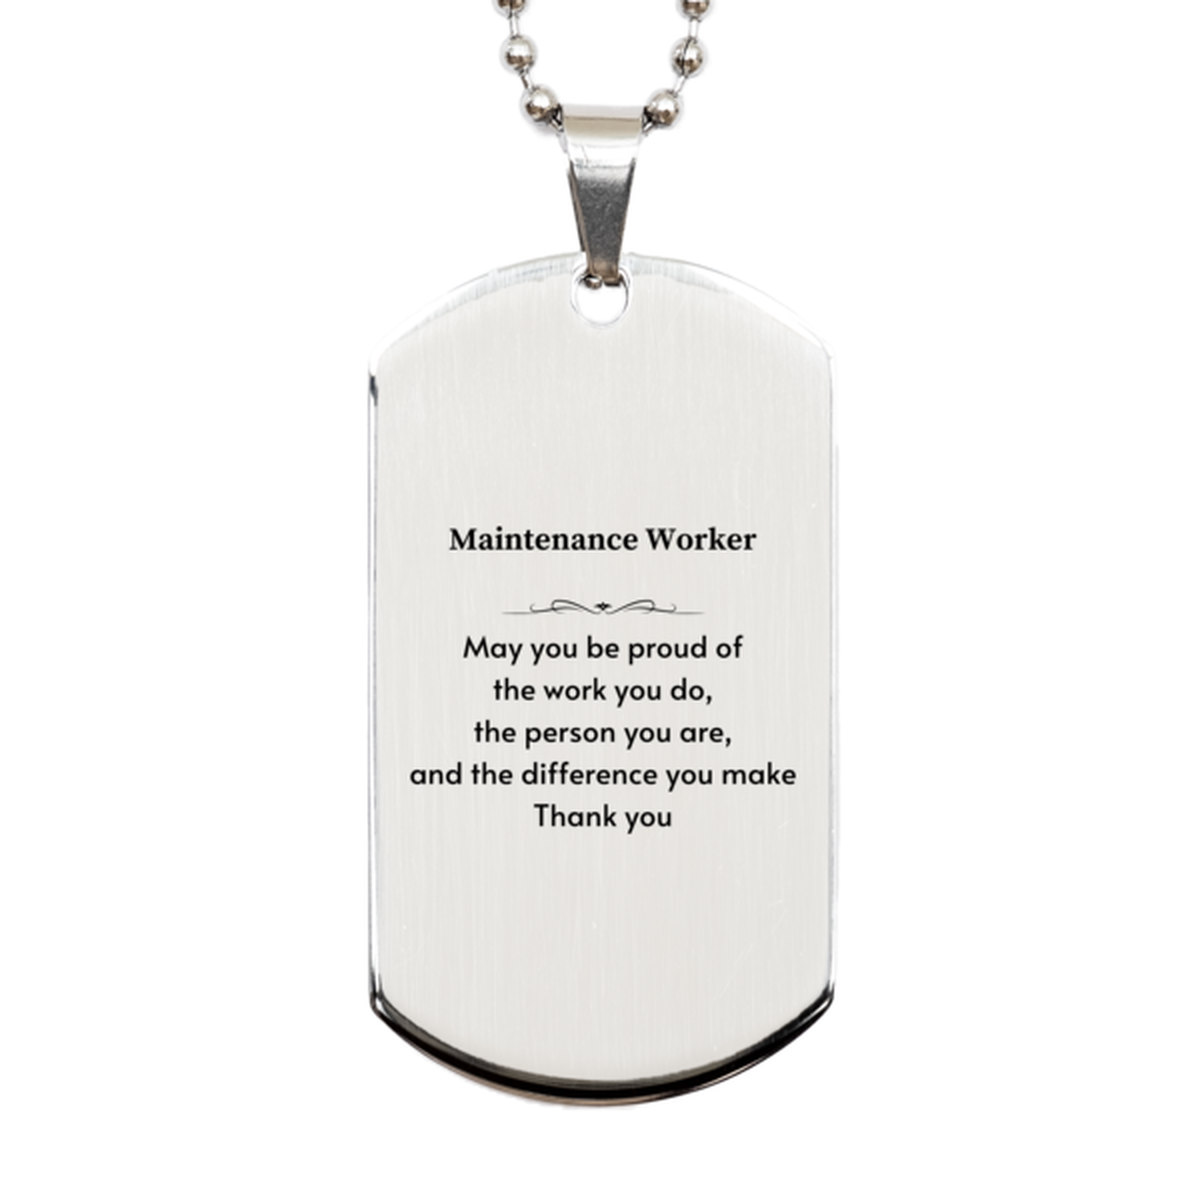 Heartwarming Silver Dog Tag Retirement Coworkers Gifts for Maintenance Worker, Maintenance Worker May You be proud of the work you do, the person you are Gifts for Boss Men Women Friends